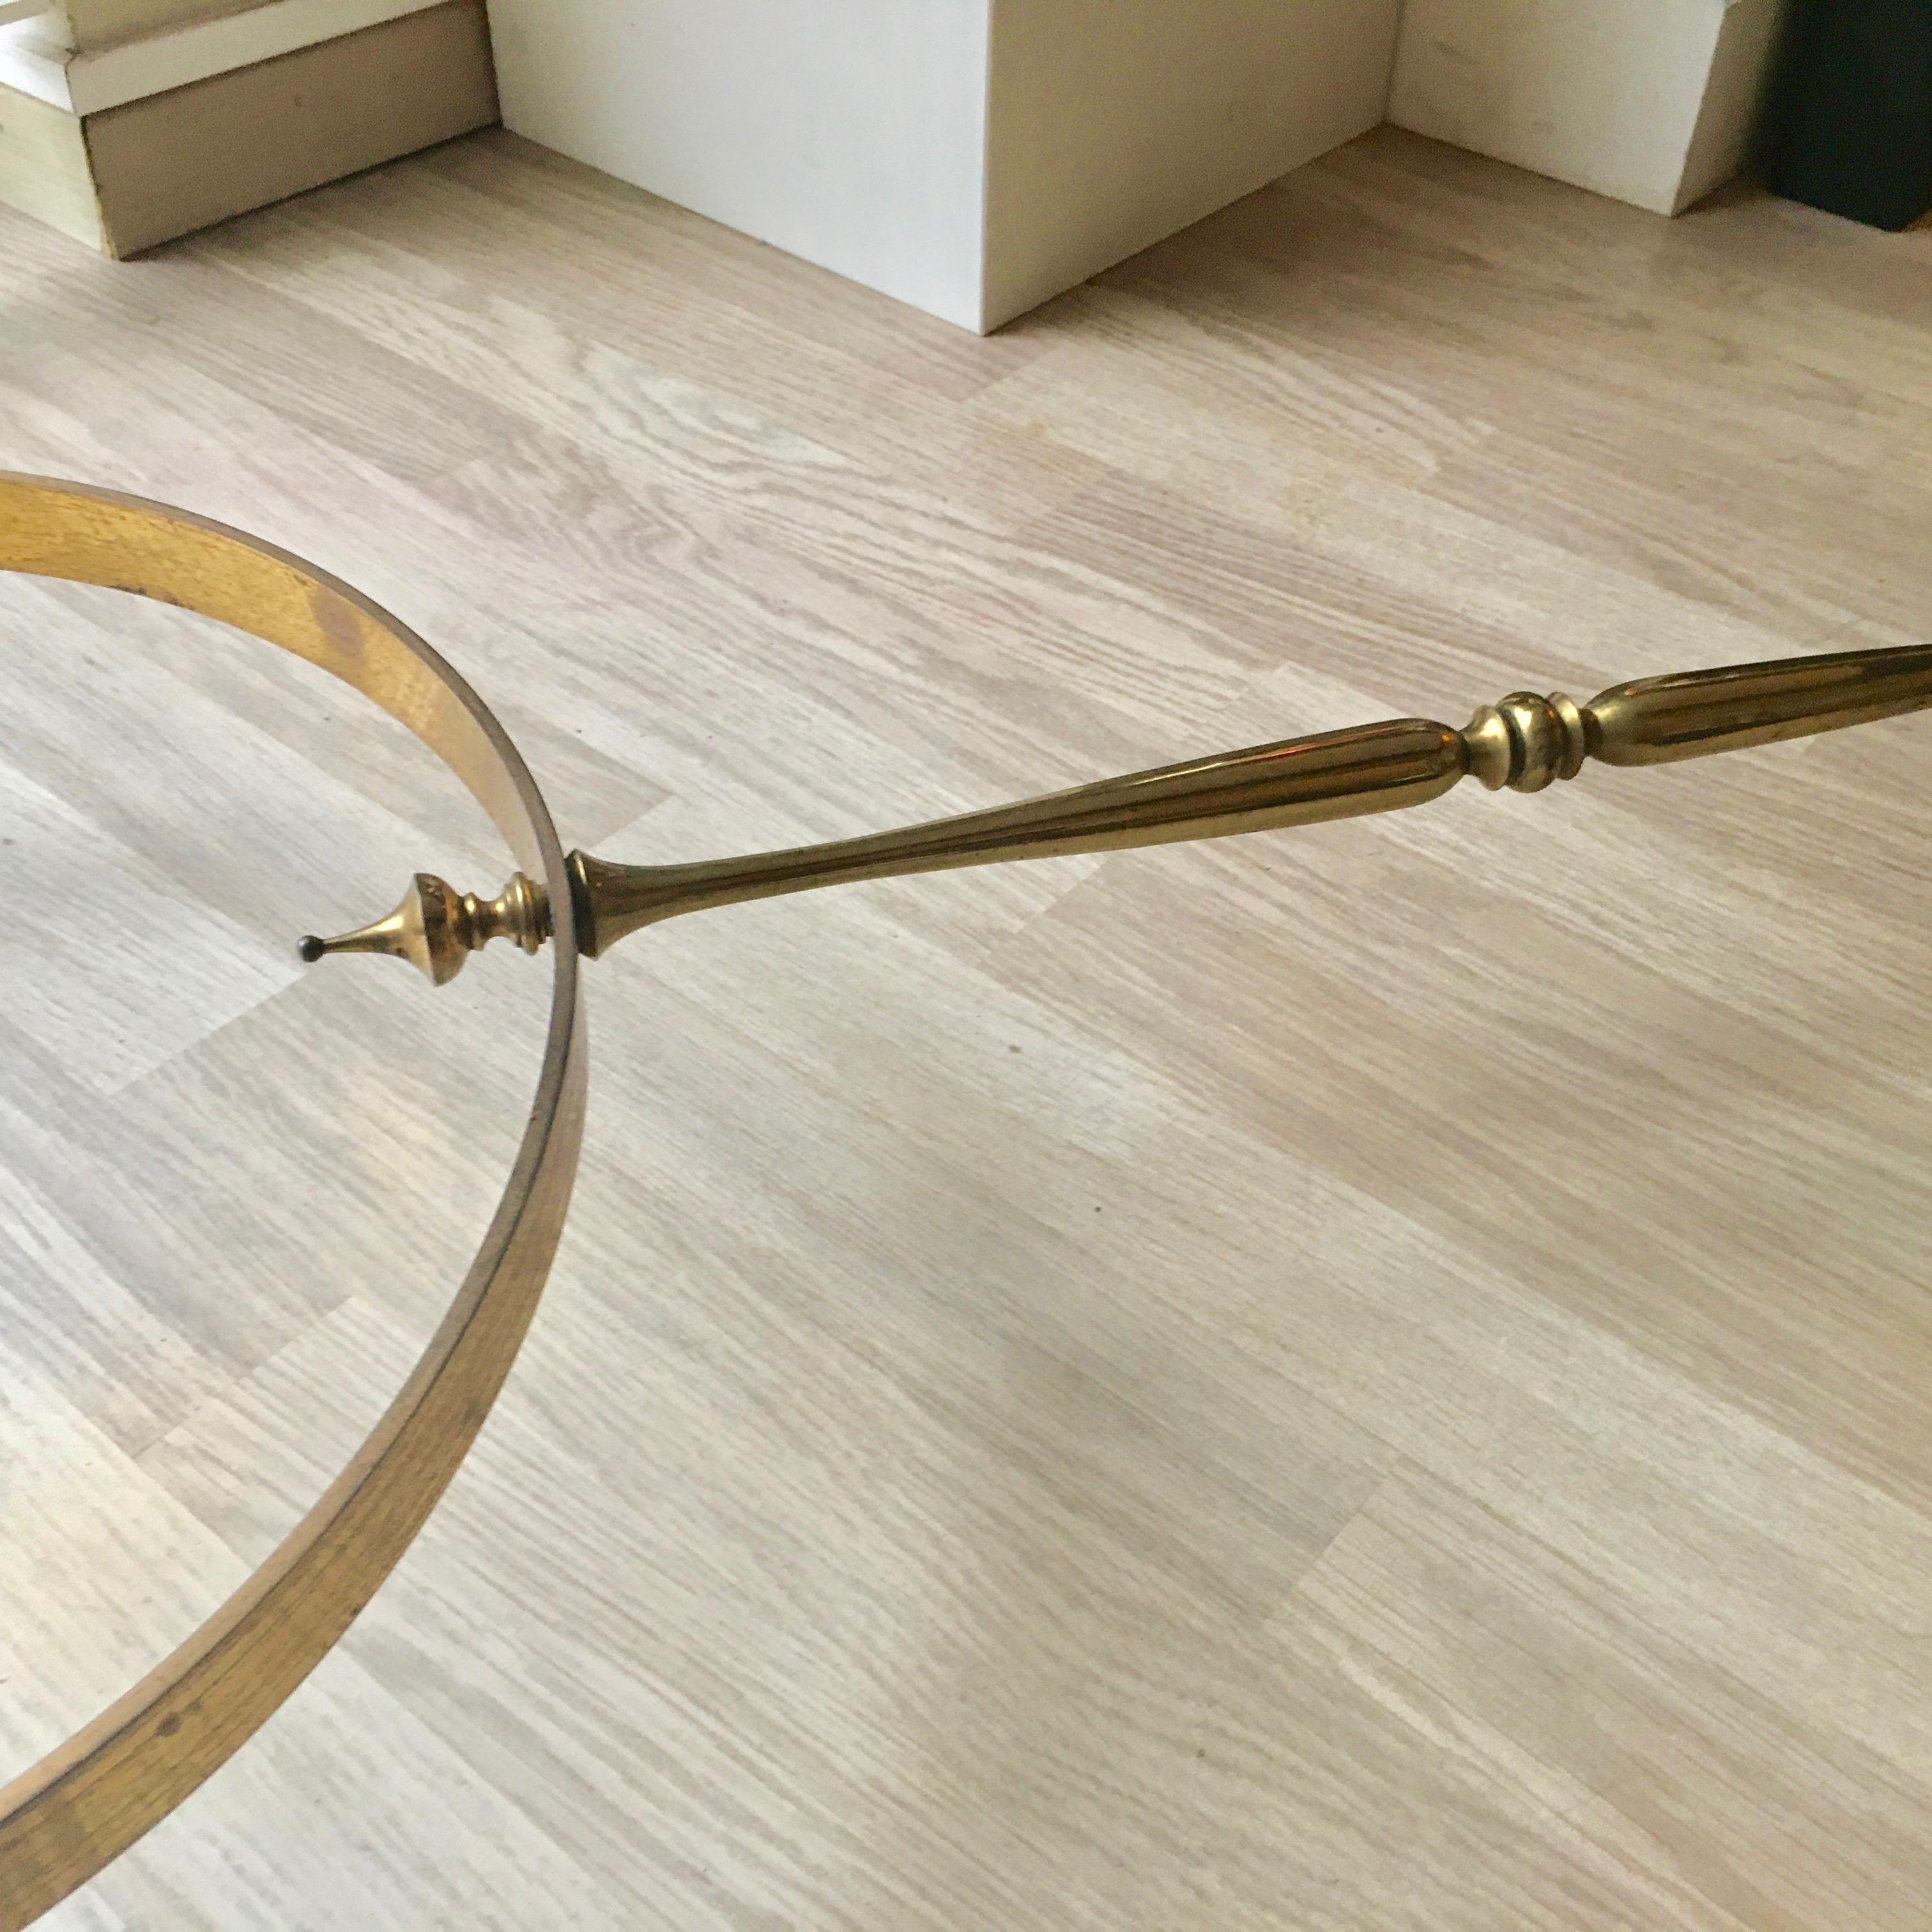 Mid-20th Century Neoclassical Brass Table with a Glass and Mirror Top by Maison Jansen, France  For Sale